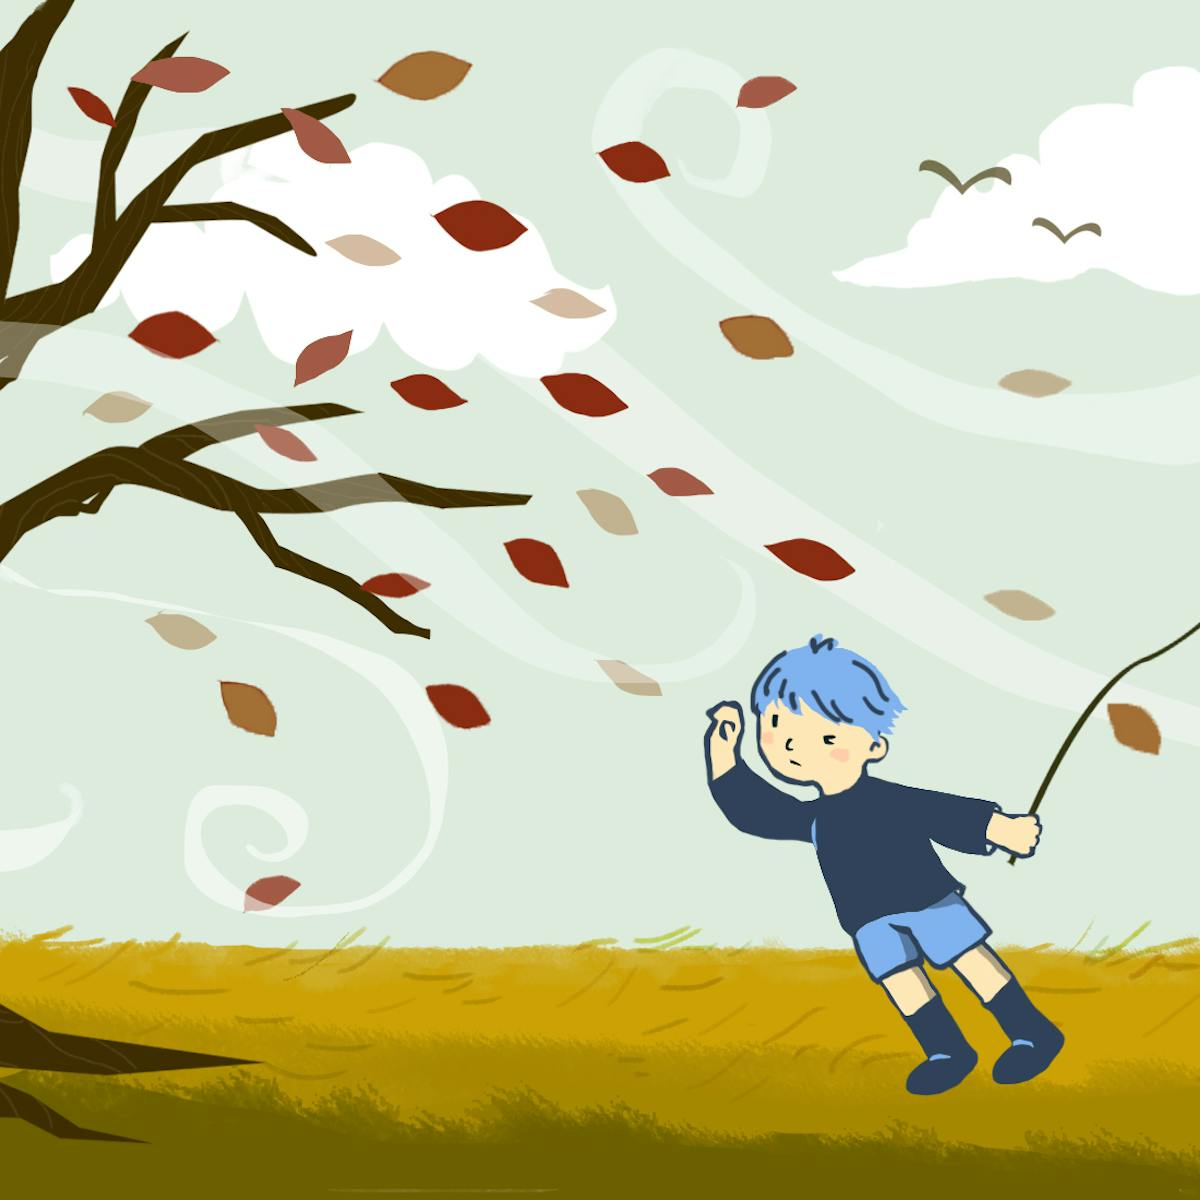 Curious Kids: What causes windy weather?